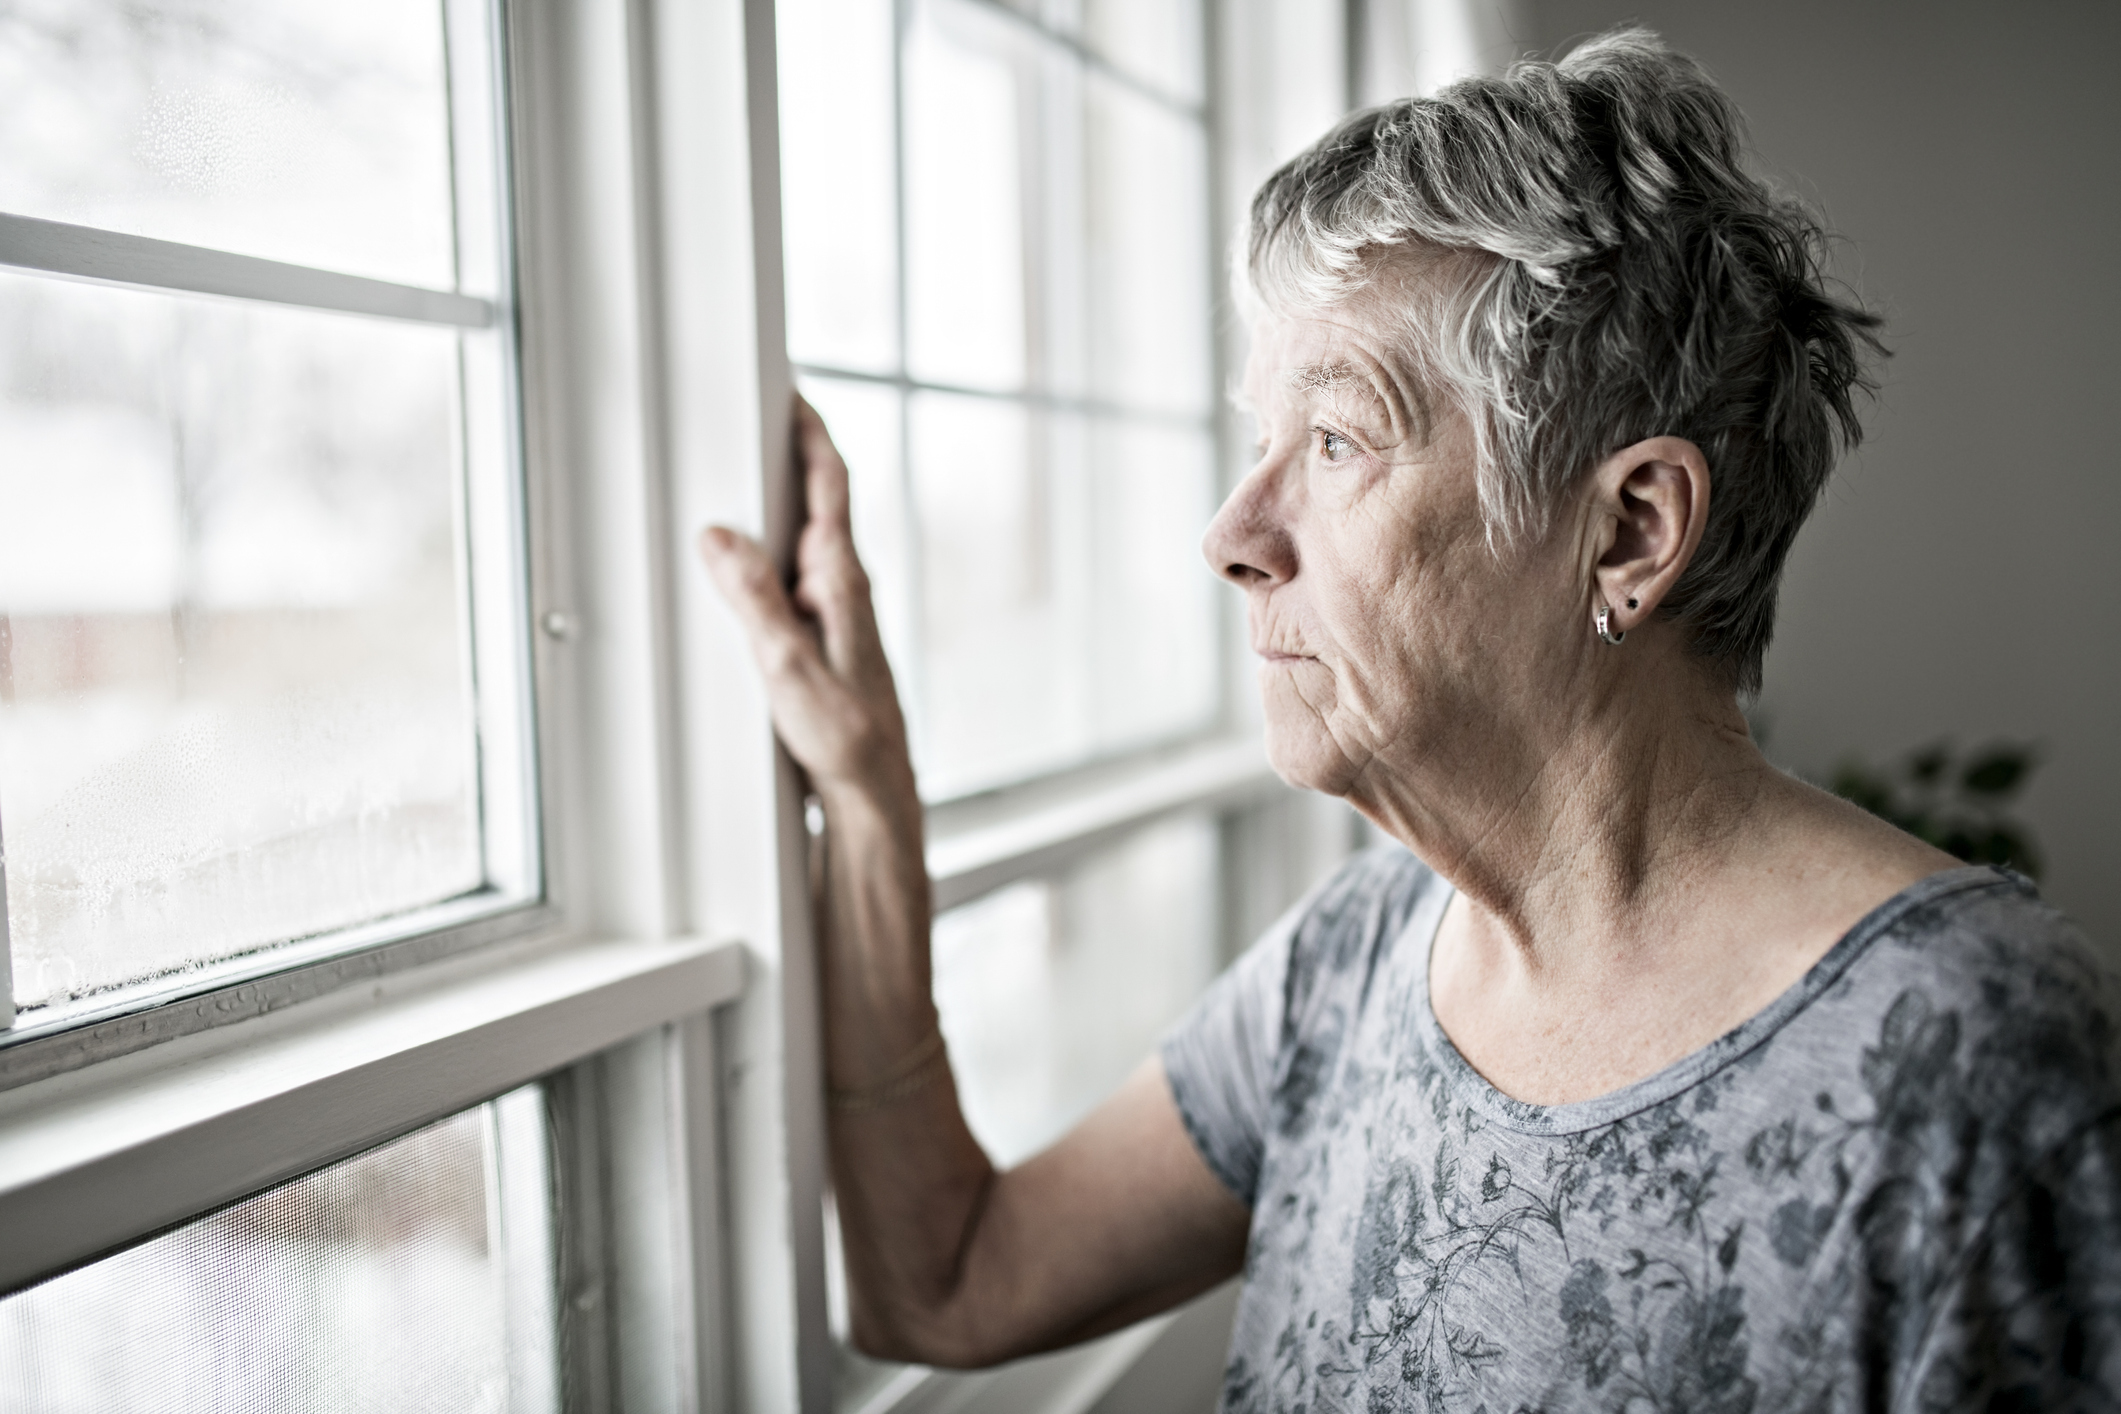 Stay connected: Tips from the National Institute on Aging for combating  social isolation and loneliness